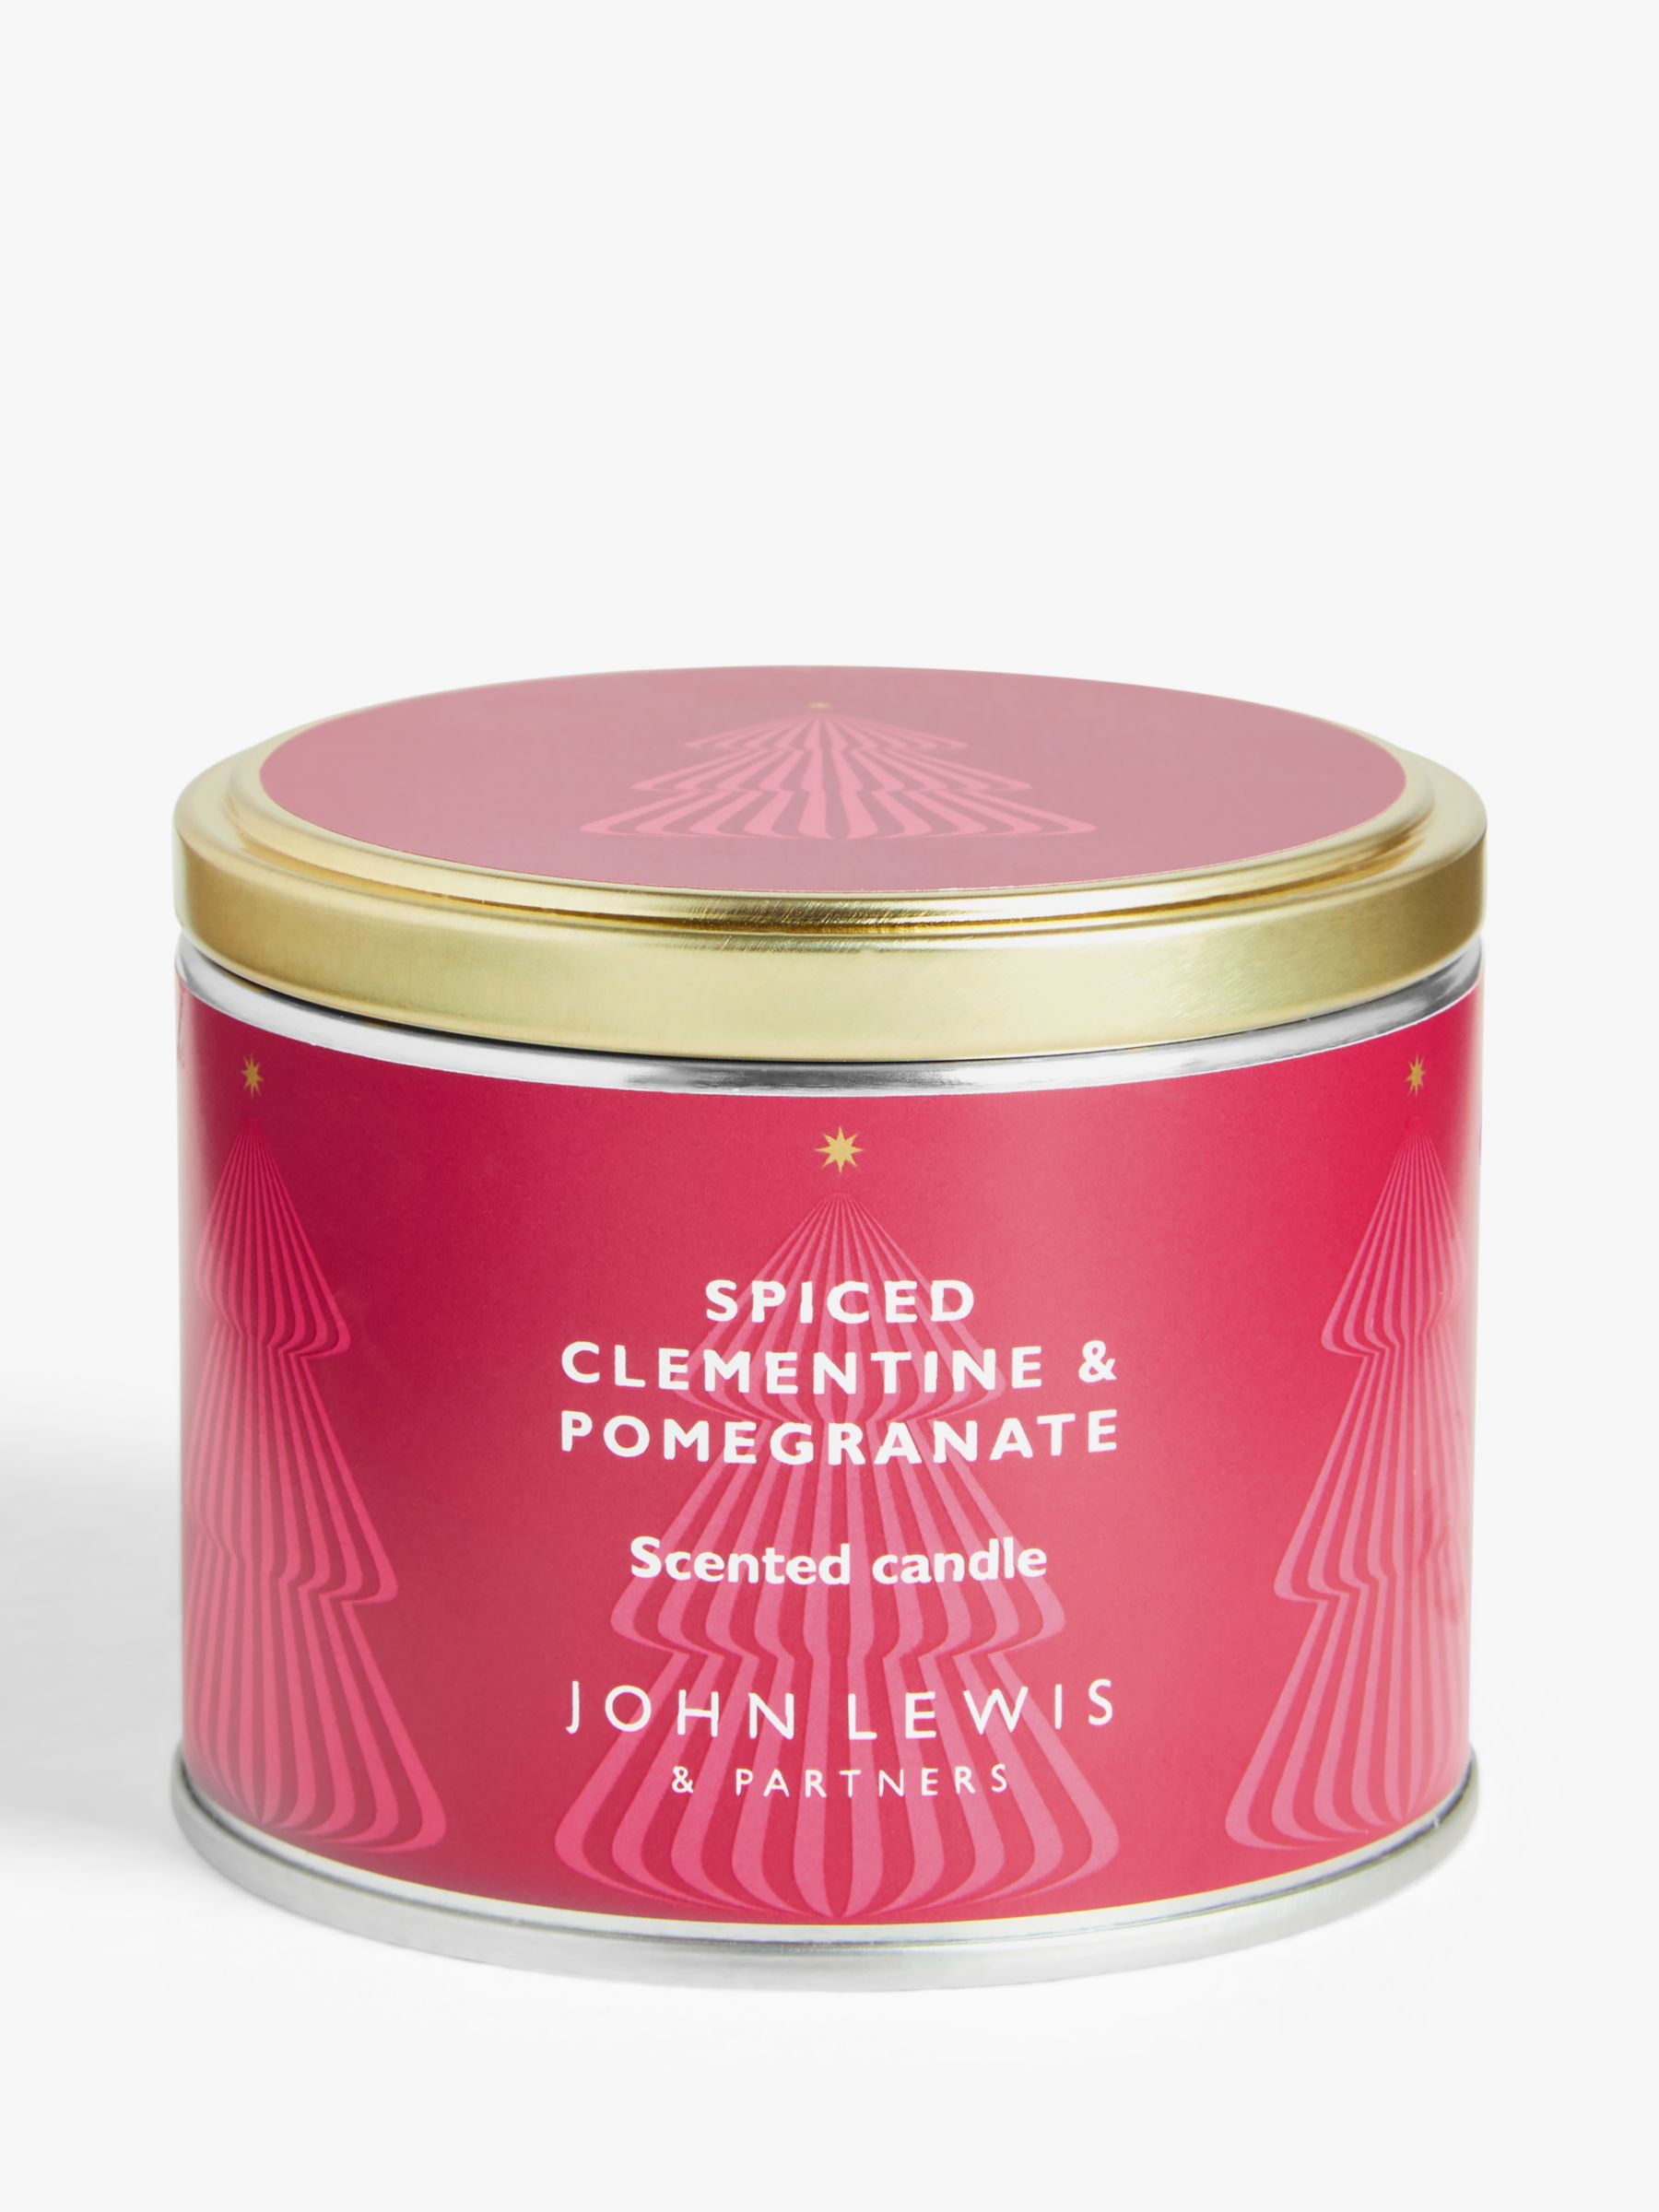 Spiced Clementine & Pomegranate Candle, £4